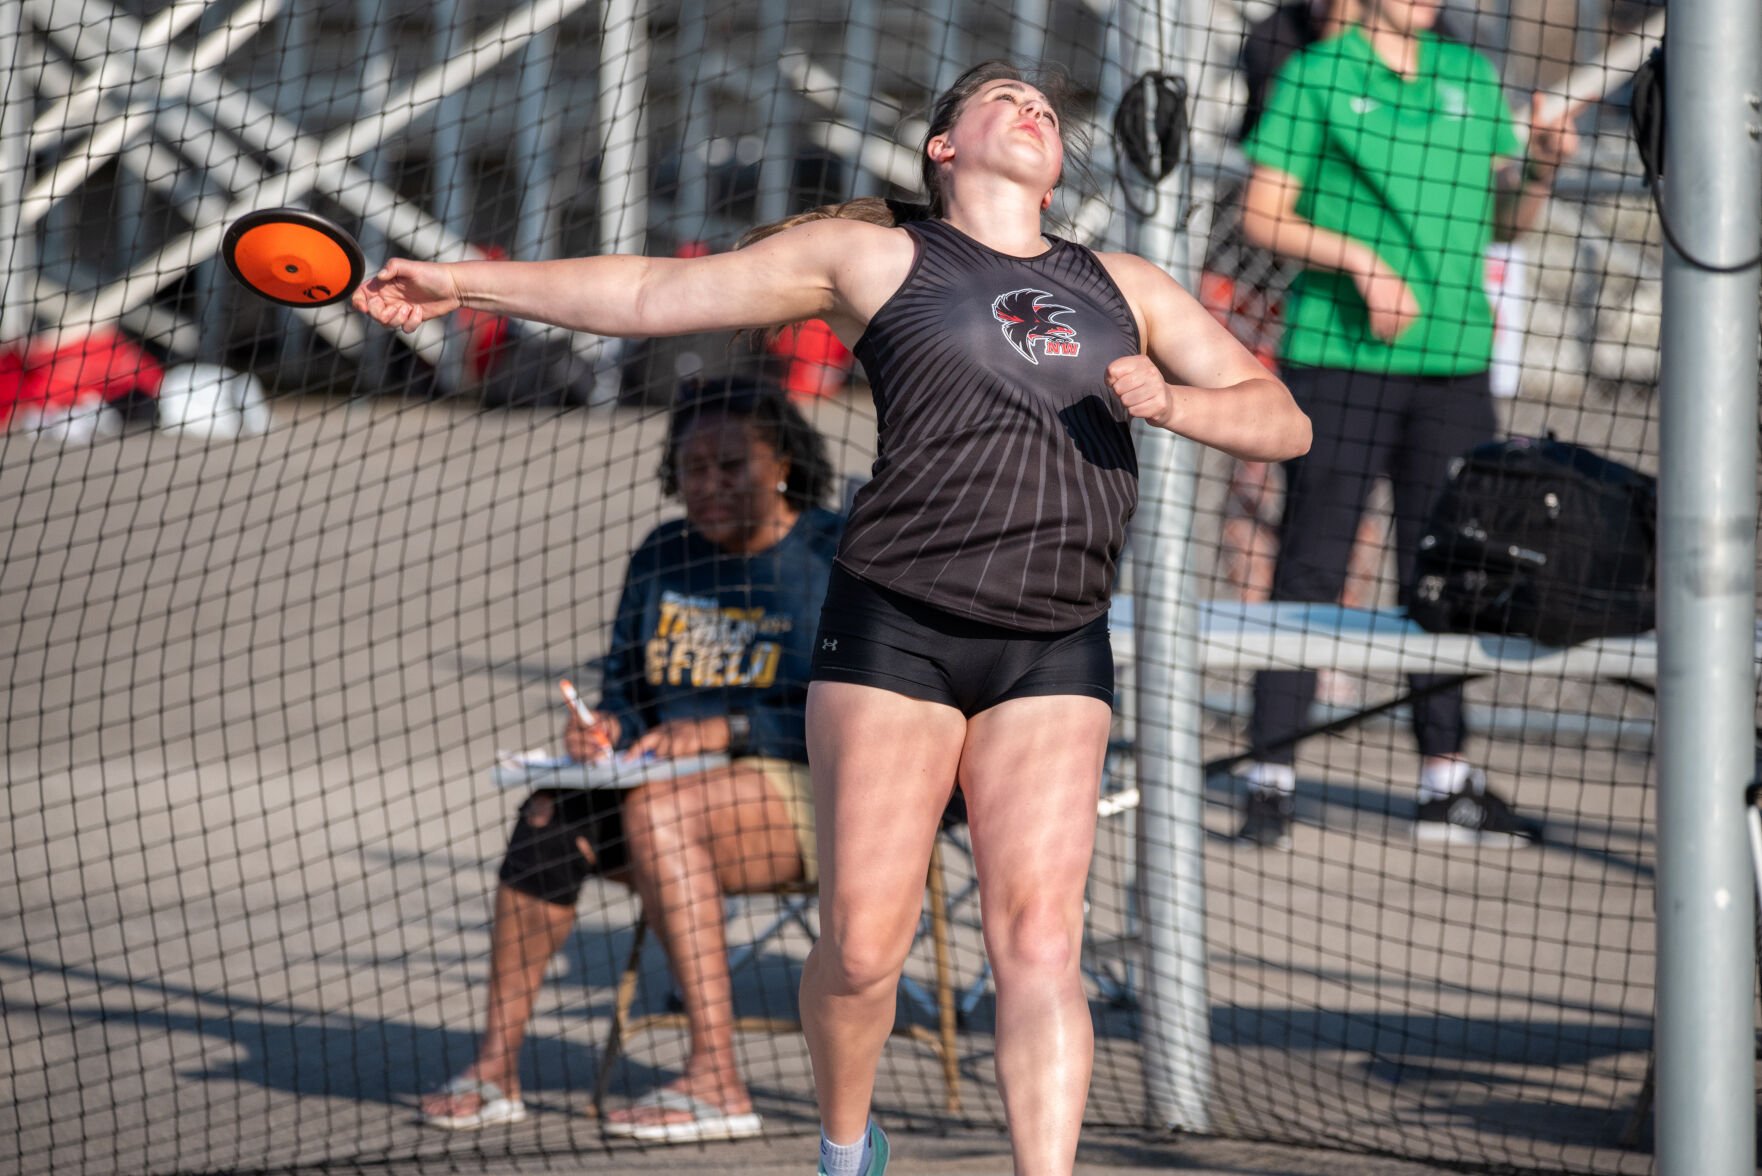 Gianna Glovack Wins Discus Title Against Casey Fetzner at NFL Championships